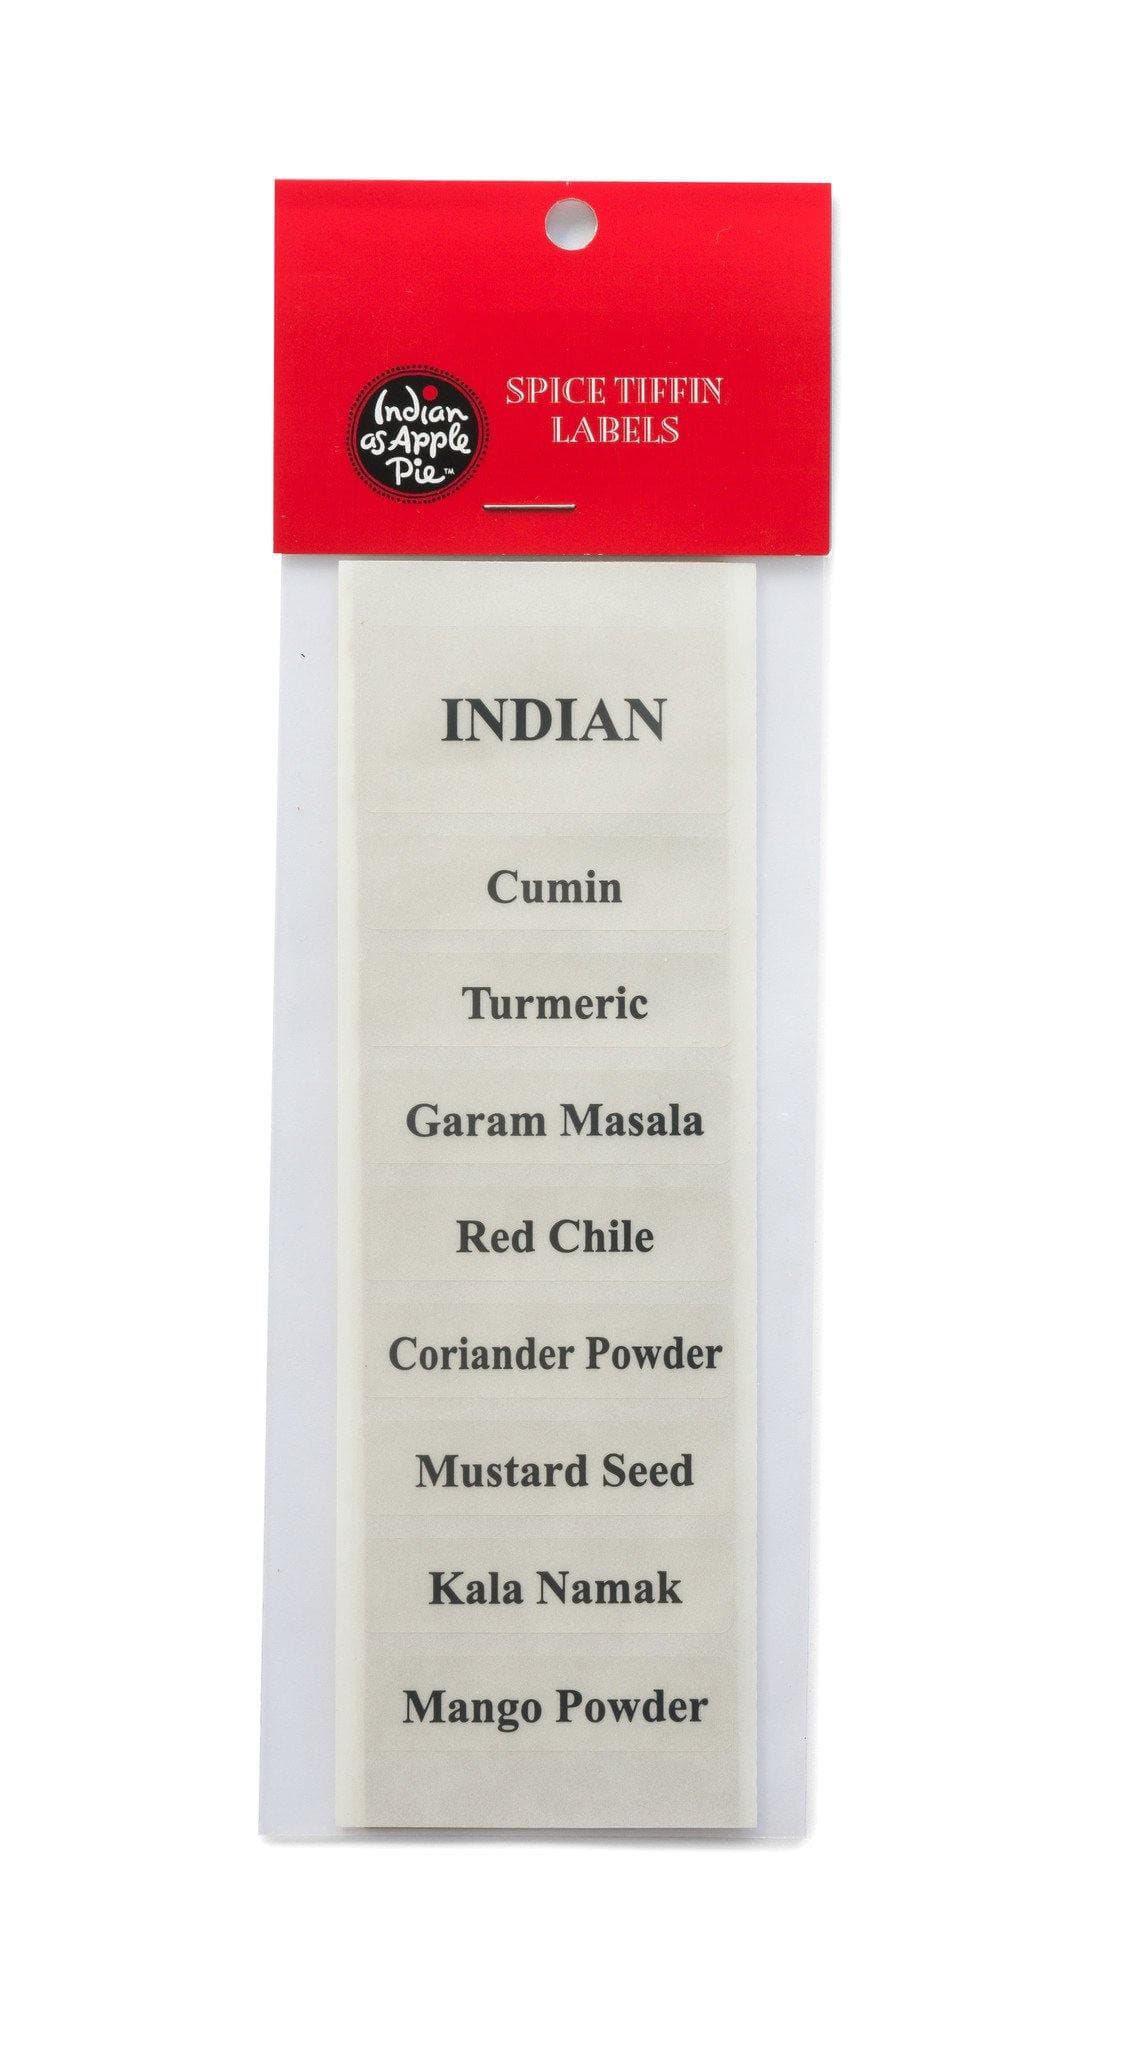 44 Square Spice Labels for Indian Spices, Hindi + English